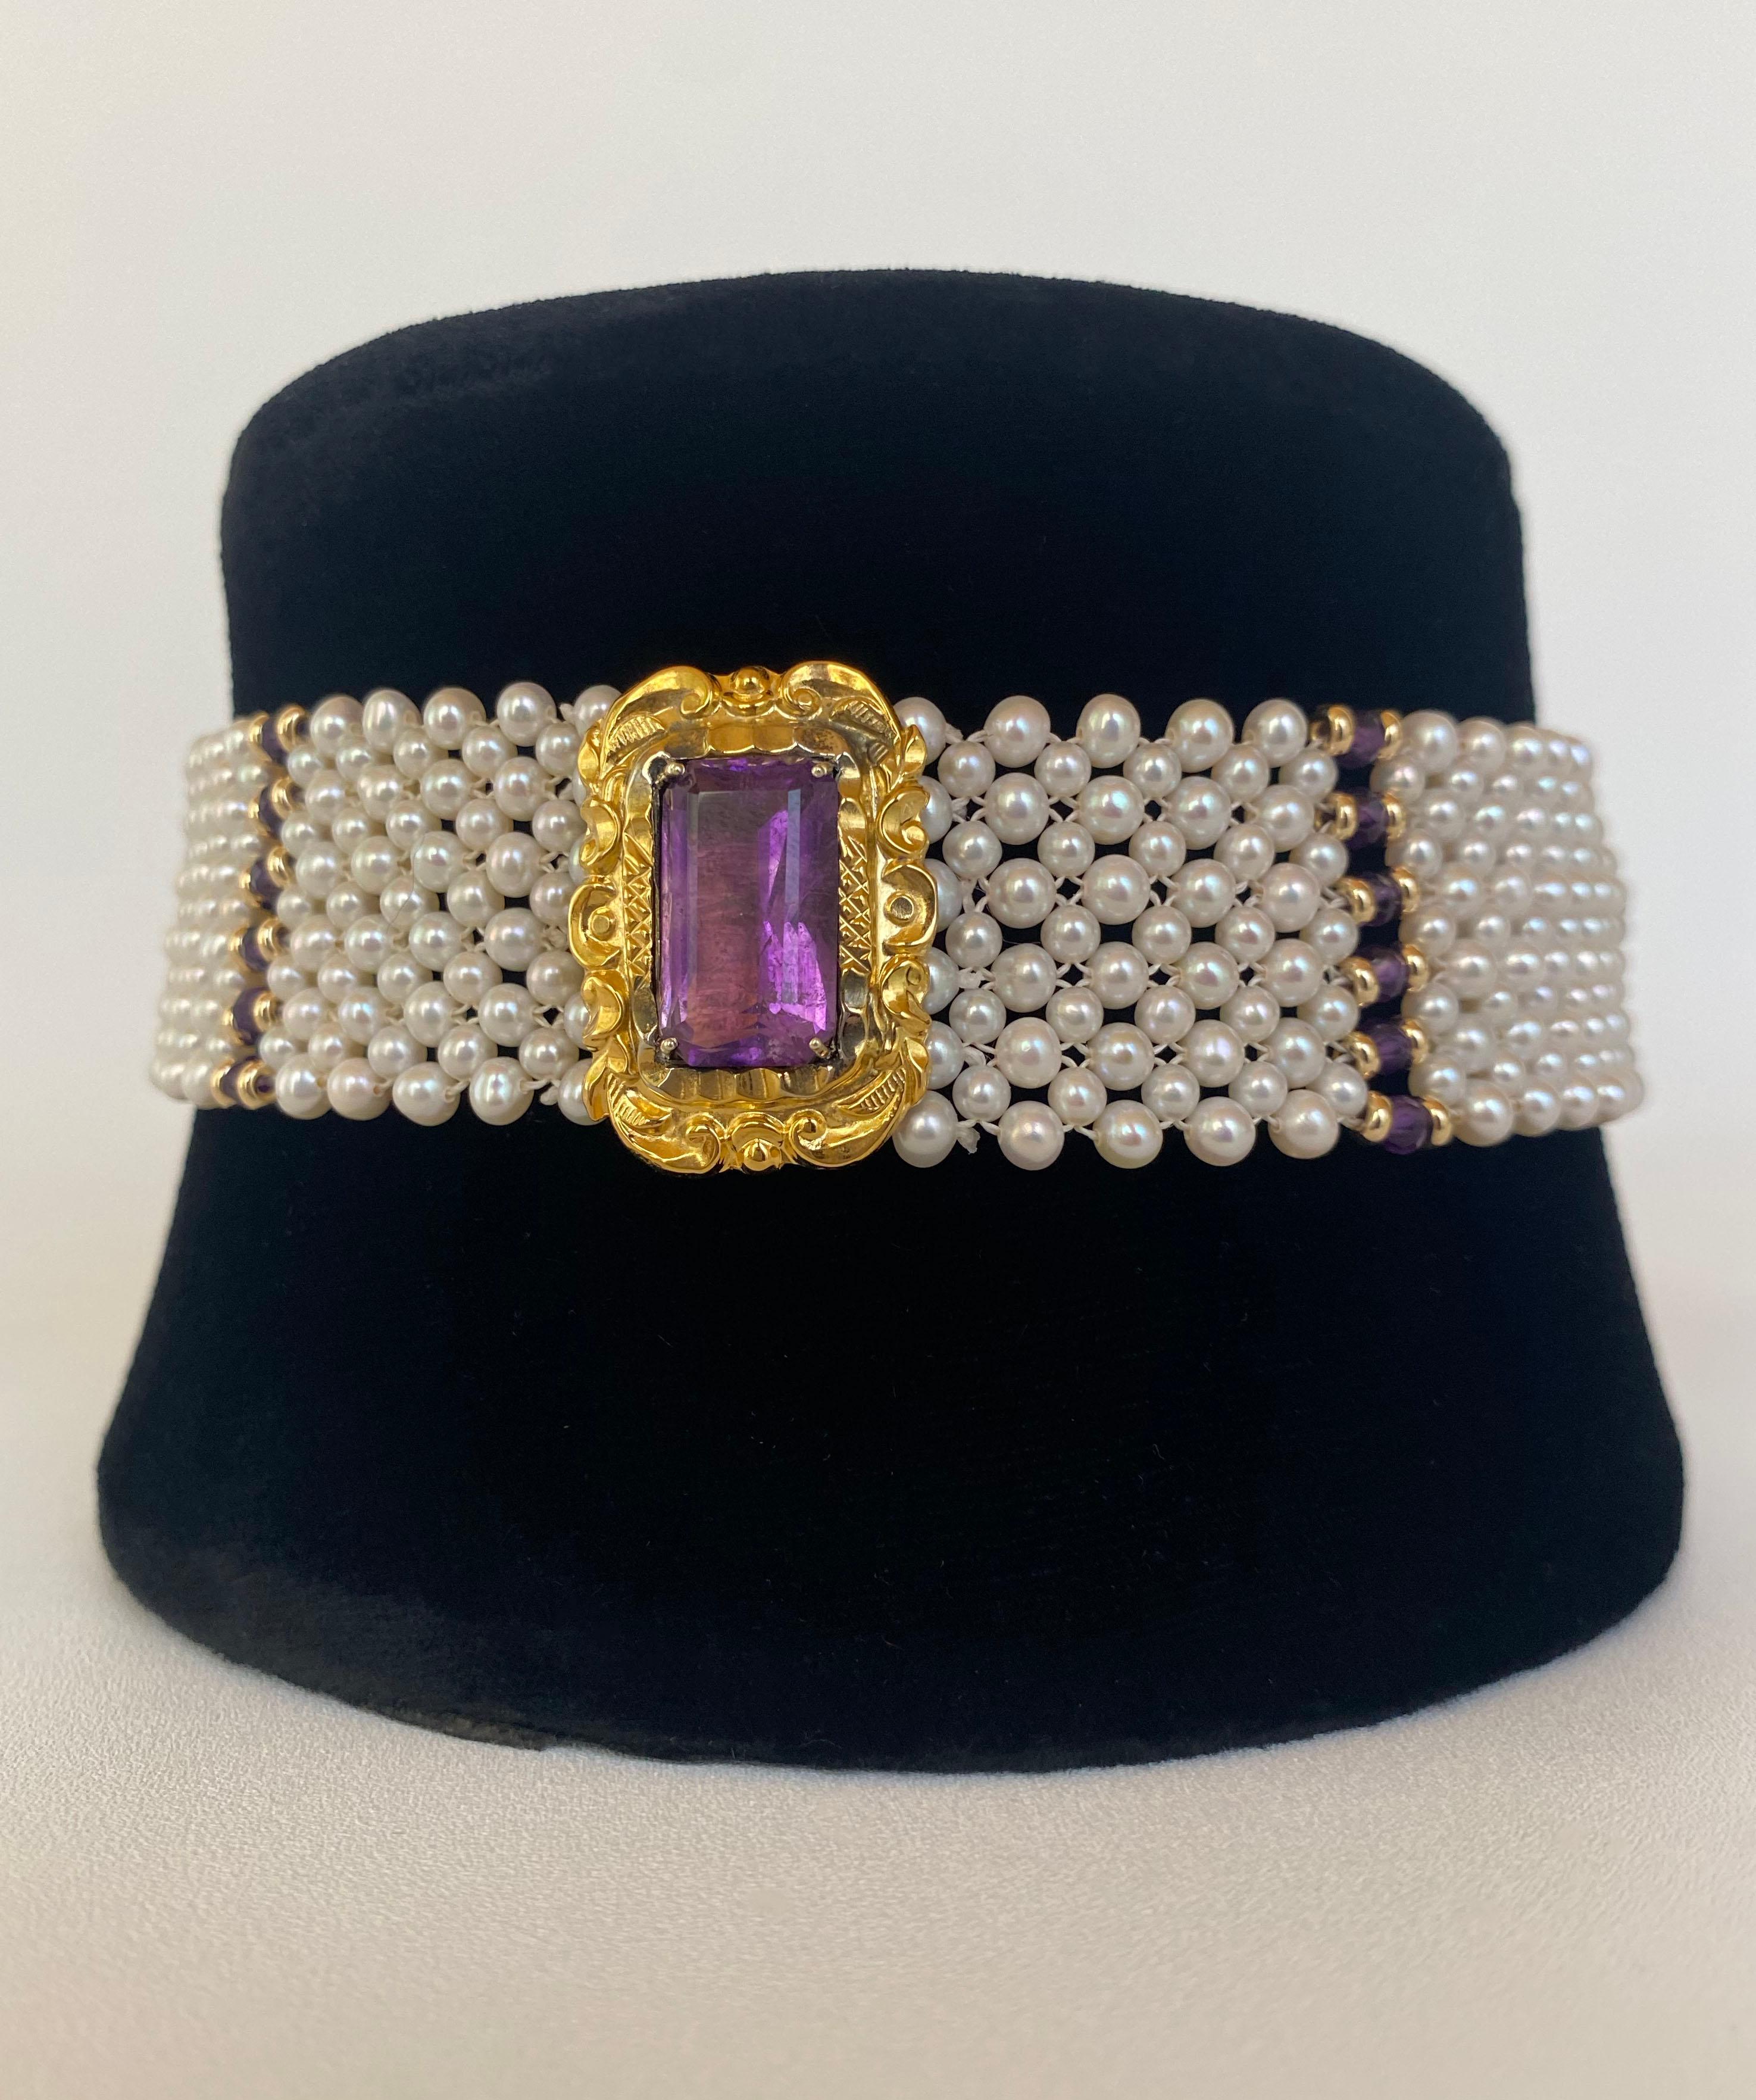 Gorgeous choker hand woven by Marina J. This lovely piece features a tight lace like design all woven together by high luster real Pearls, and accented columns of faceted Amethyst and 14k solid Yellow Gold findings; perfectly complimenting the